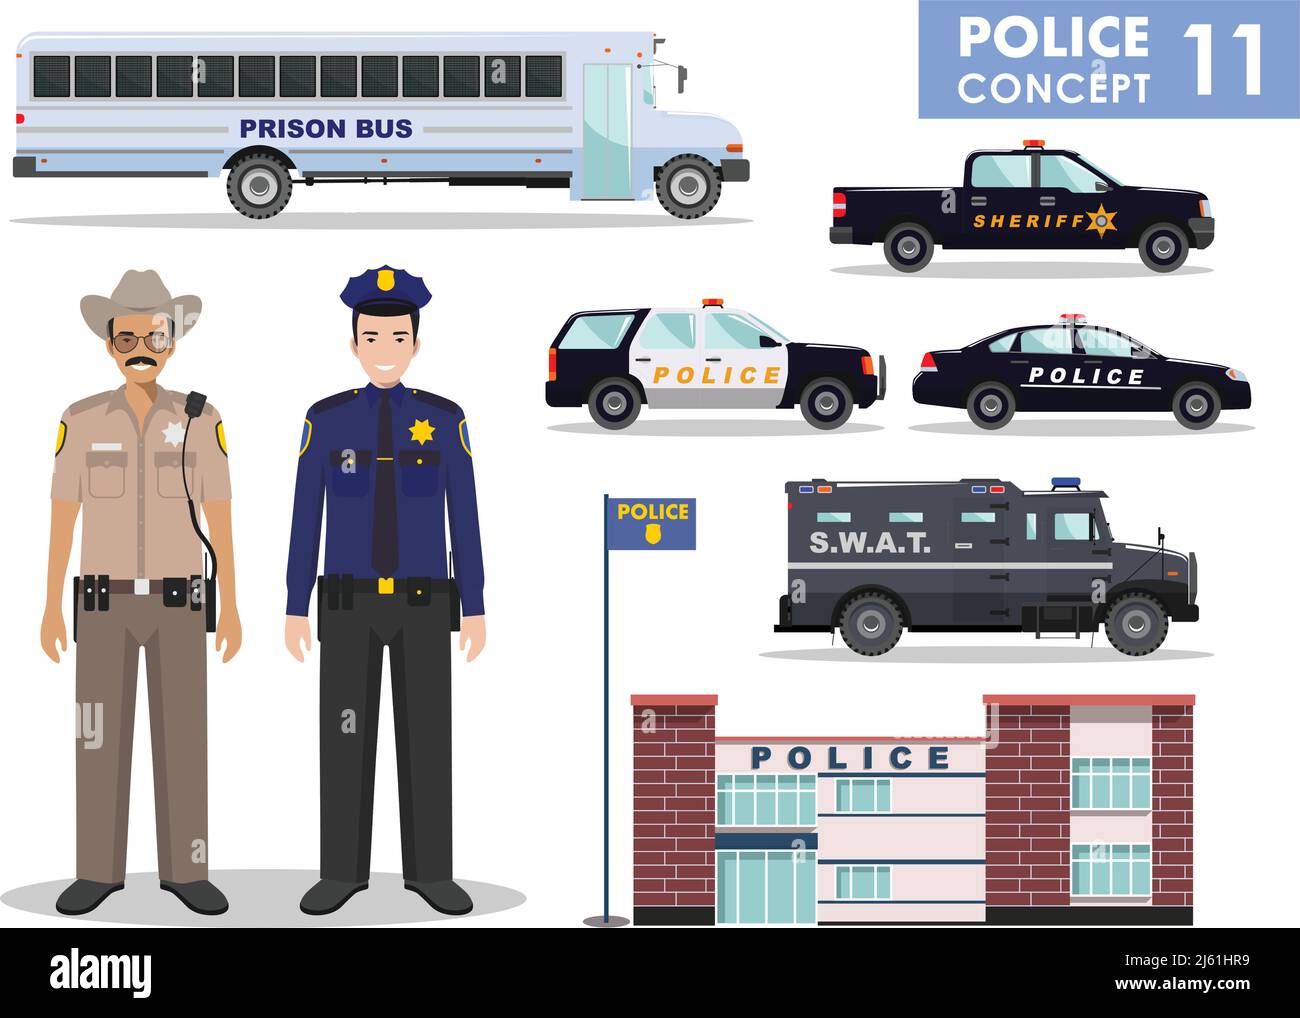 Detailed illustration of police department, police car, police officer, sheriff, armored S.W.A.T. truck and prison bus in flat style on white backgrou Stock Vector